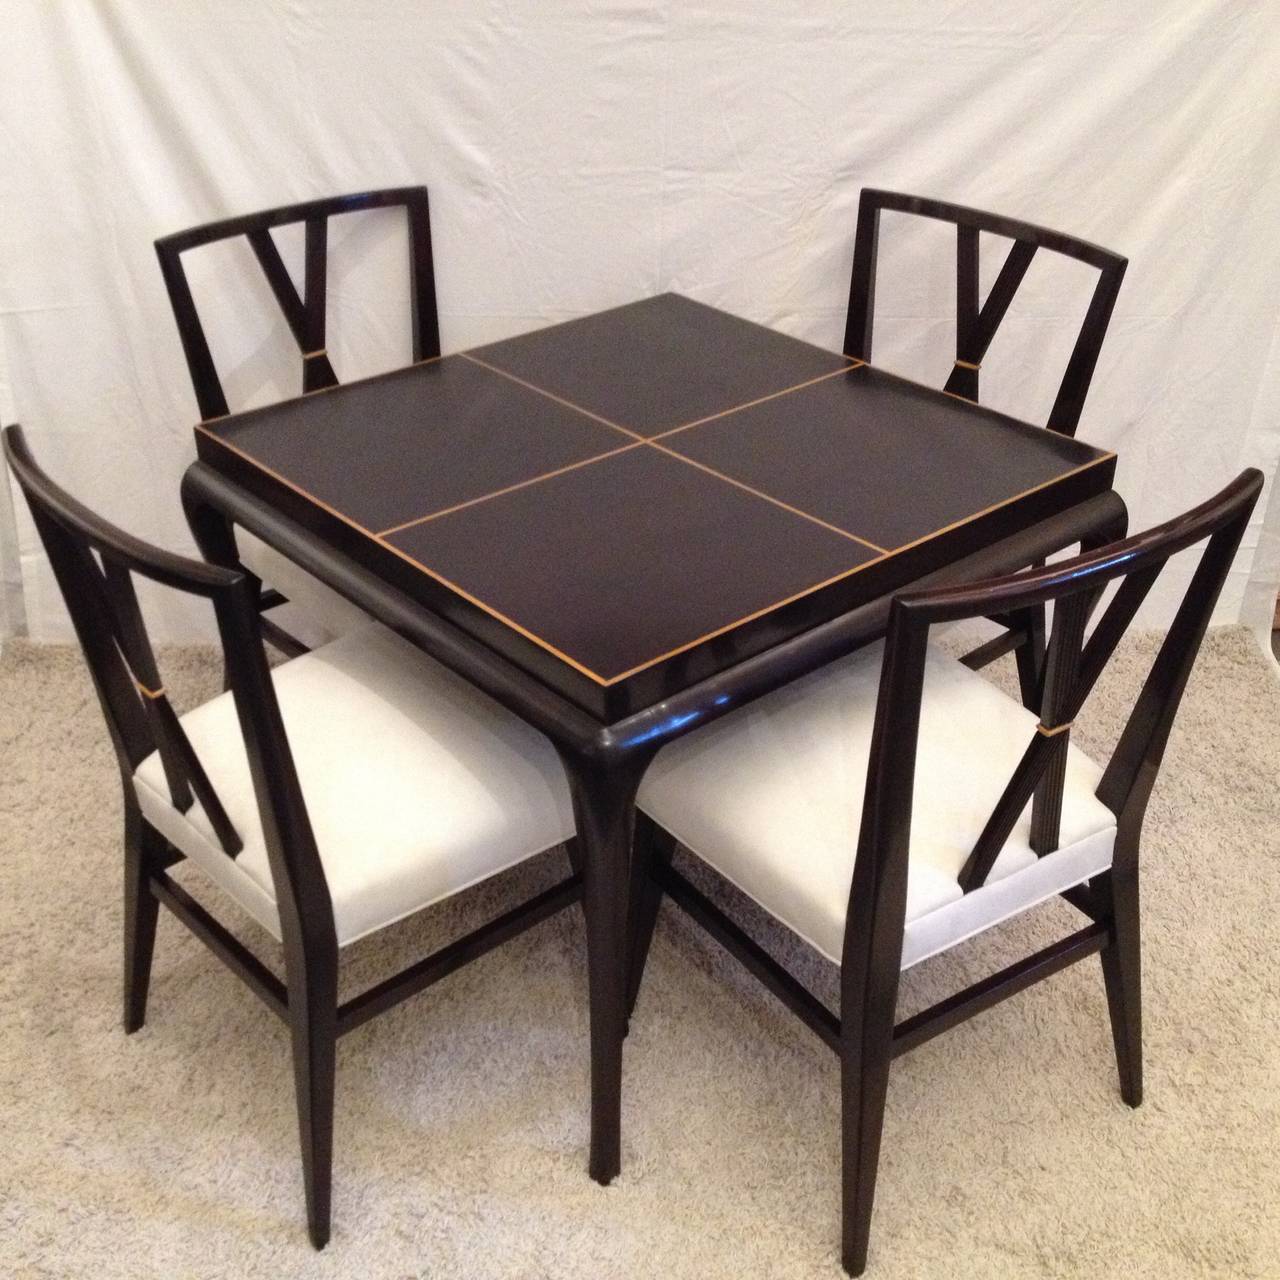 Tommi Parzinger card table or small dining table and four double X back chairs, rare dark mahogany Hollywood inlaid top.
Table size: 36 x 36 29